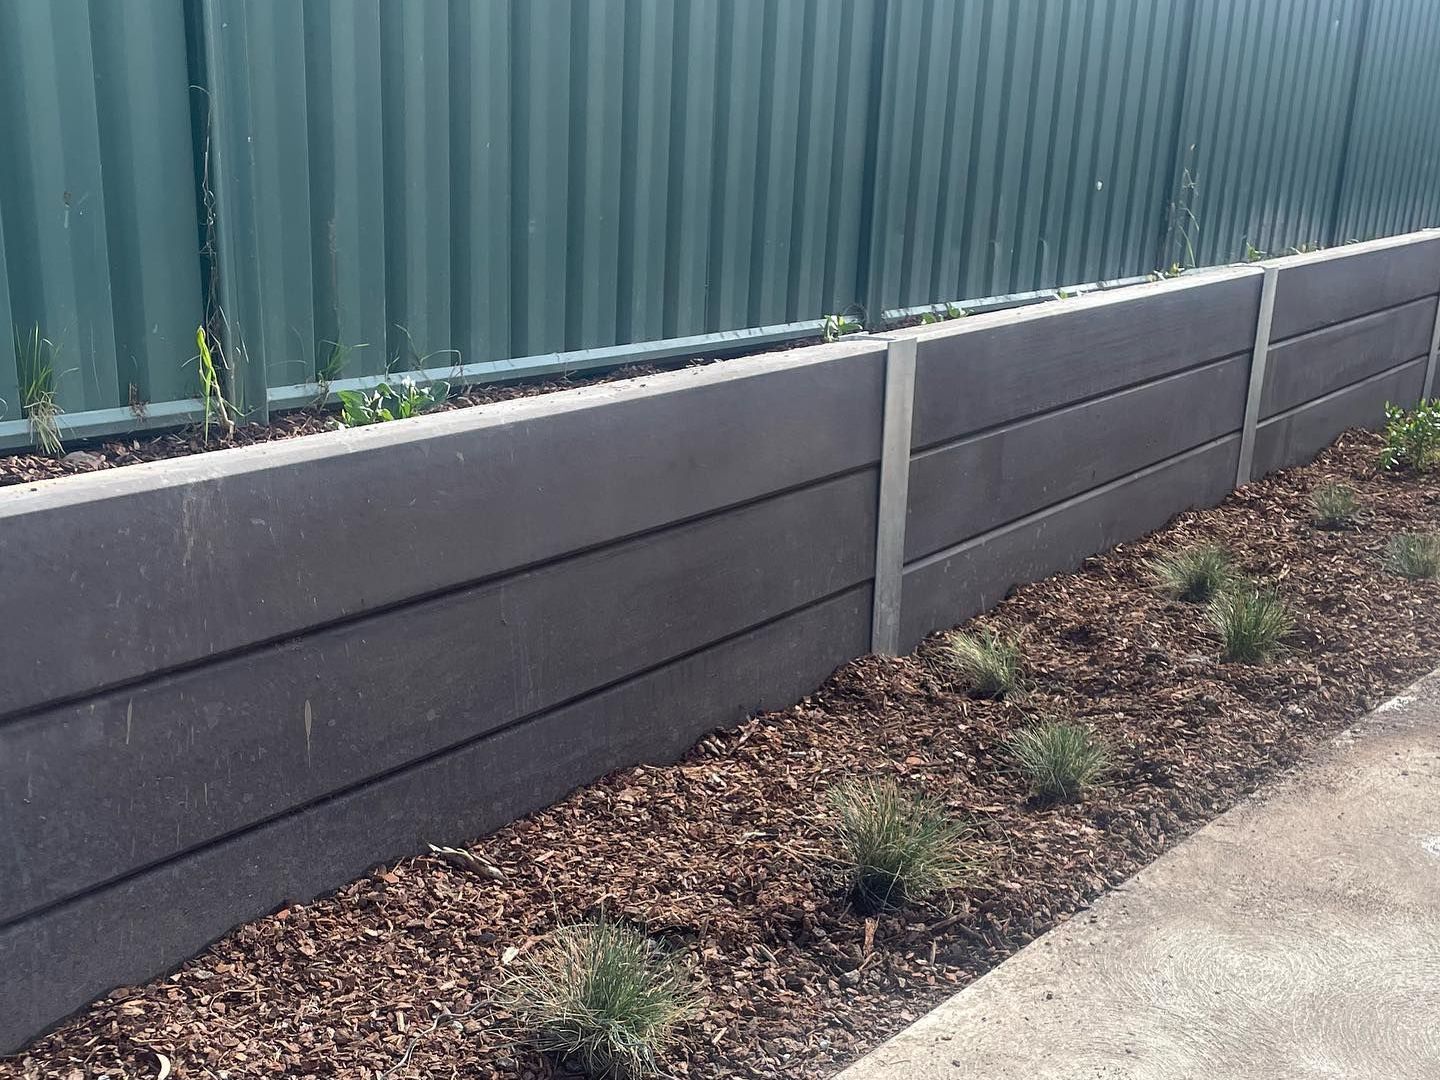 A concrete wall with a green fence in the background